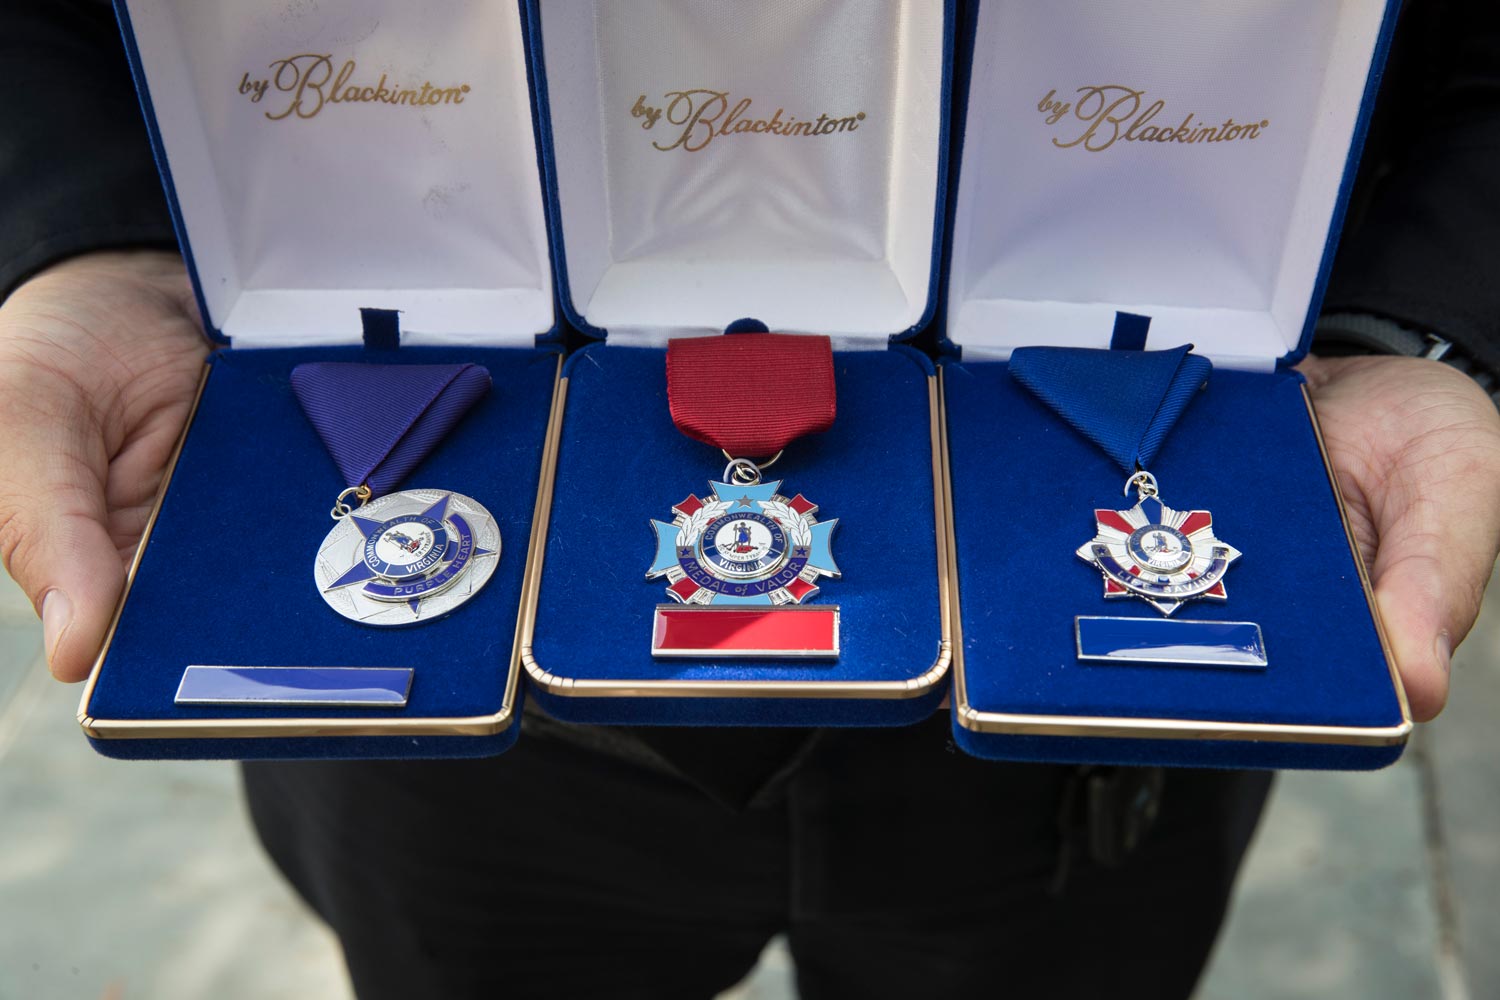 Officer Champigny holds his Purple Heart, Medal of Valor and Life Saving Award in their cases